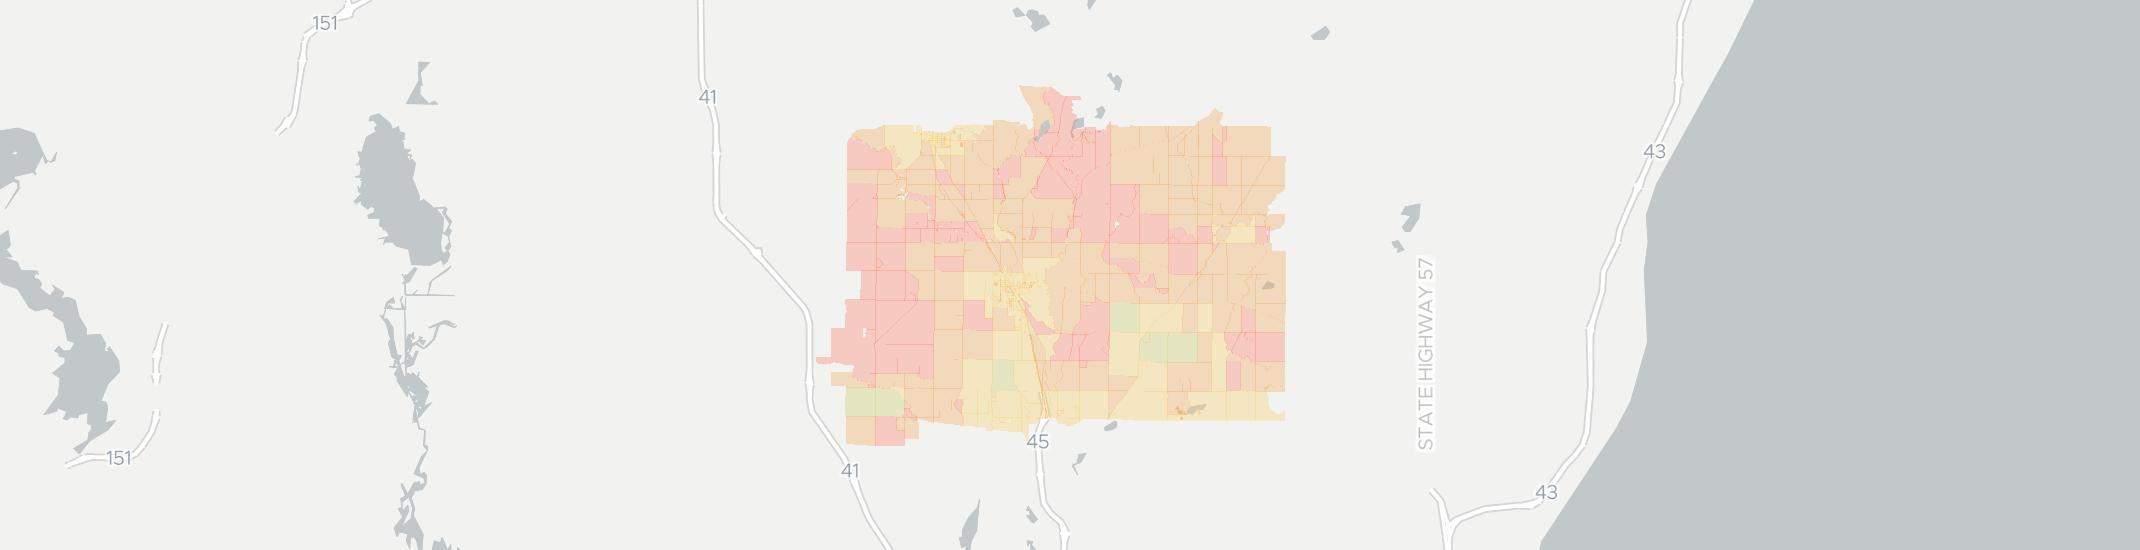 Kewaskum Internet Competition Map. Click for interactive map.